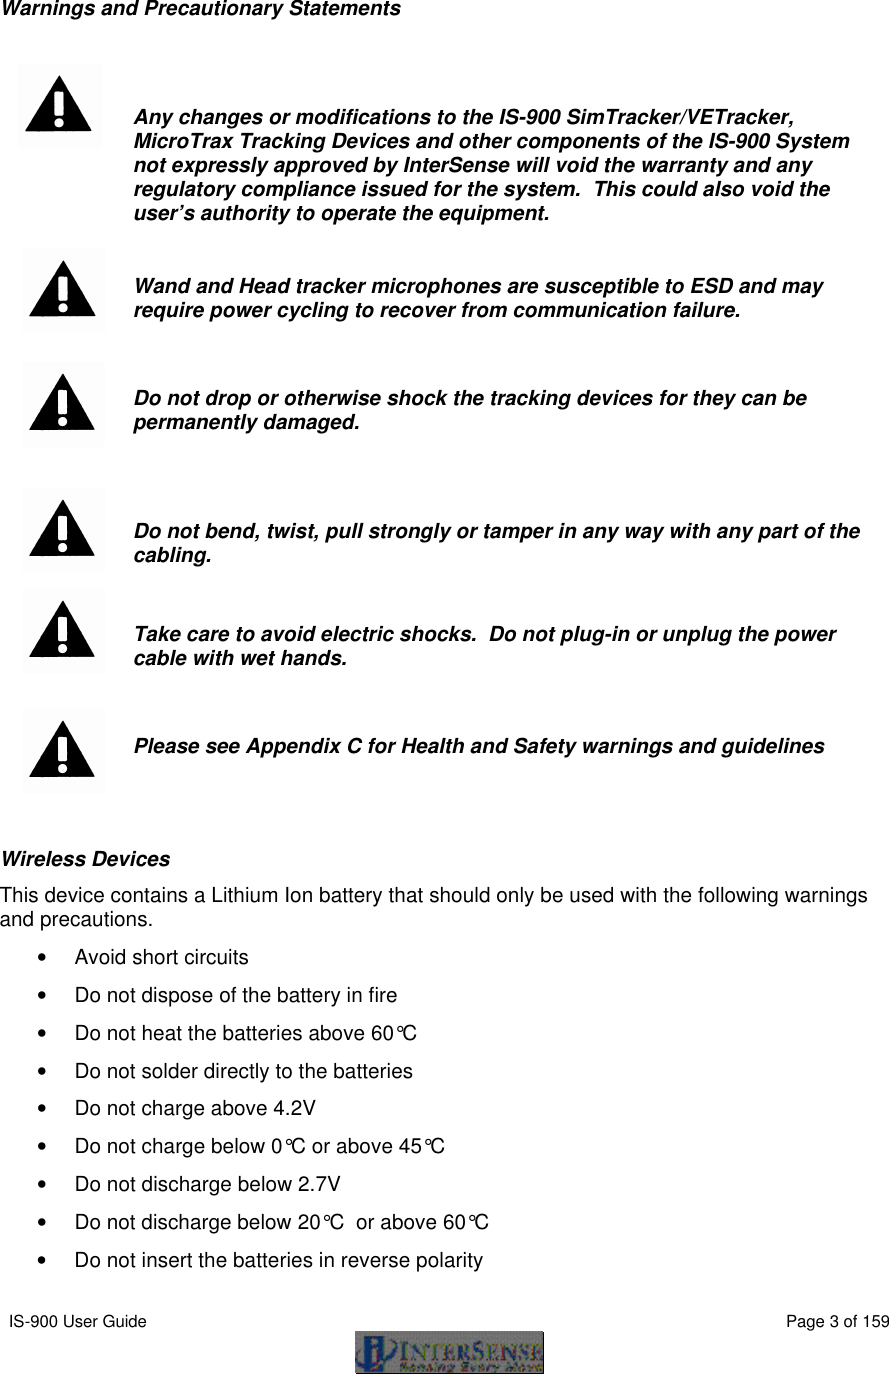  IS-900 User Guide                                                                                                                                          Page 3 of 159    Warnings and Precautionary Statements     Any changes or modifications to the IS-900 SimTracker/VETracker, MicroTrax Tracking Devices and other components of the IS-900 System not expressly approved by InterSense will void the warranty and any regulatory compliance issued for the system.  This could also void the user’s authority to operate the equipment.    Wand and Head tracker microphones are susceptible to ESD and may require power cycling to recover from communication failure.     Do not drop or otherwise shock the tracking devices for they can be permanently damaged.     Do not bend, twist, pull strongly or tamper in any way with any part of the cabling.    Take care to avoid electric shocks.  Do not plug-in or unplug the power cable with wet hands.    Please see Appendix C for Health and Safety warnings and guidelines  Wireless Devices This device contains a Lithium Ion battery that should only be used with the following warnings and precautions. • Avoid short circuits • Do not dispose of the battery in fire • Do not heat the batteries above 60°C  • Do not solder directly to the batteries • Do not charge above 4.2V • Do not charge below 0°C or above 45°C   • Do not discharge below 2.7V • Do not discharge below 20°C  or above 60°C  • Do not insert the batteries in reverse polarity 